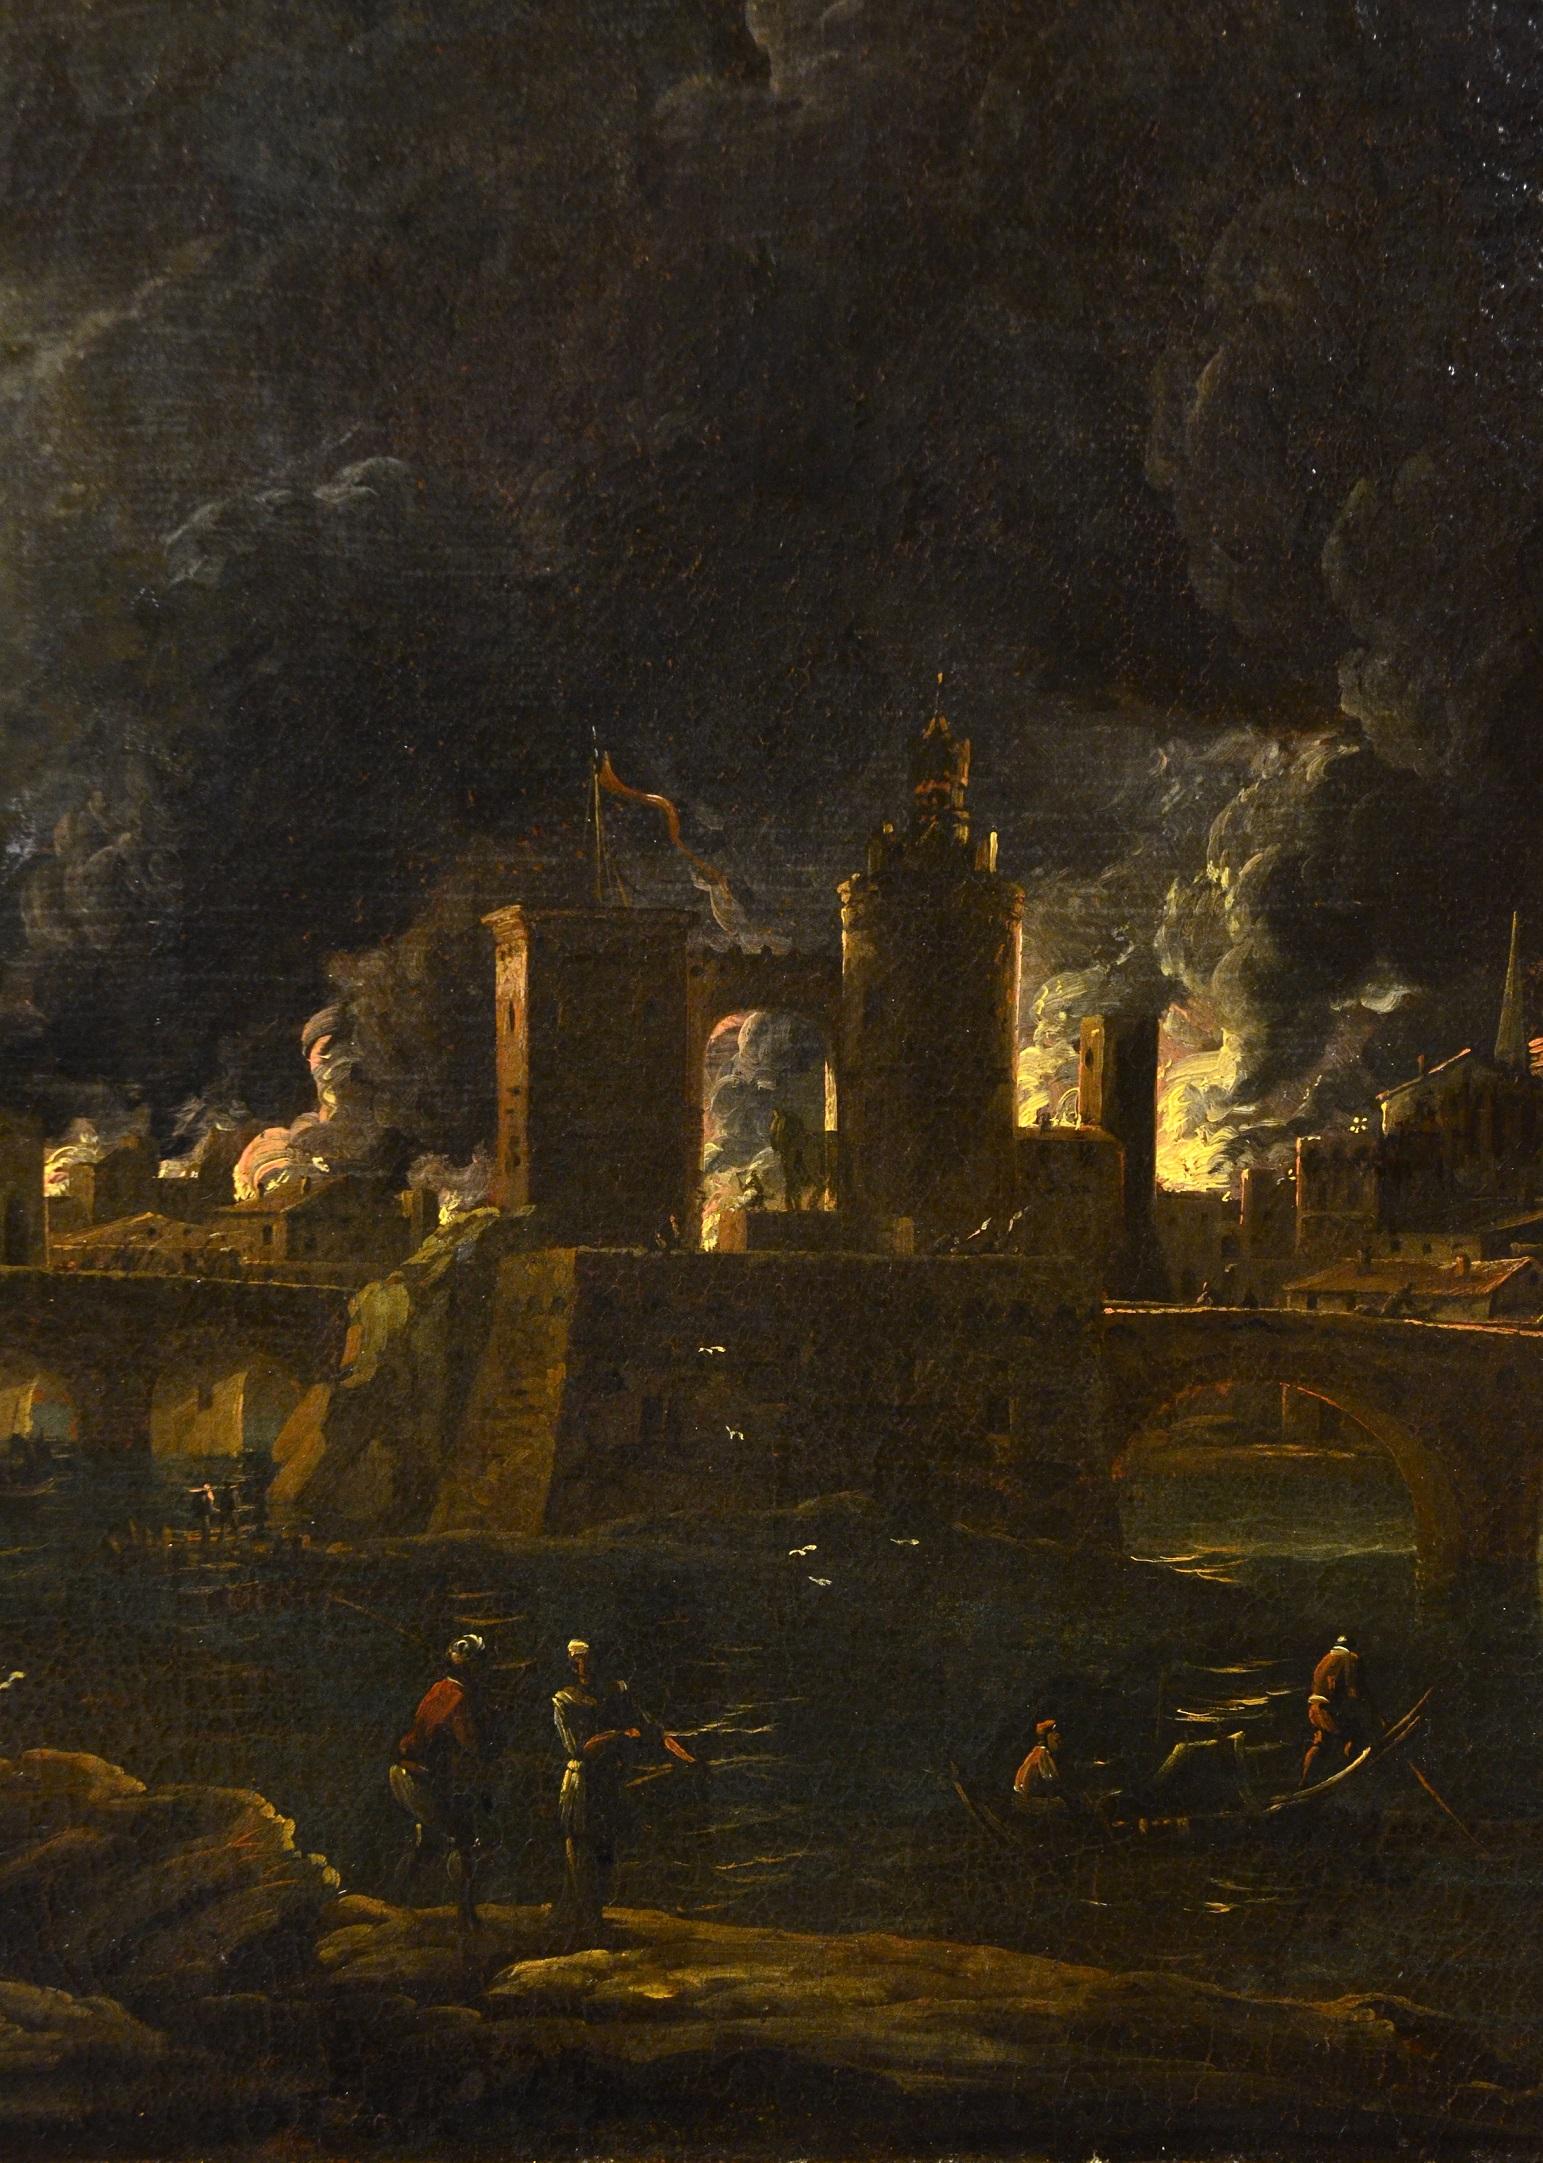 Giovanni Grevenbroeck, known as il Solfarolo (Netherlands, c. 1650 - Milan, post 1699)
Nocturne with the mythological episode of the fire of the city of Troy

Oil painting on canvas - 50 x 65 cm, framed cm. 69 x 85

The work is accompanied by an